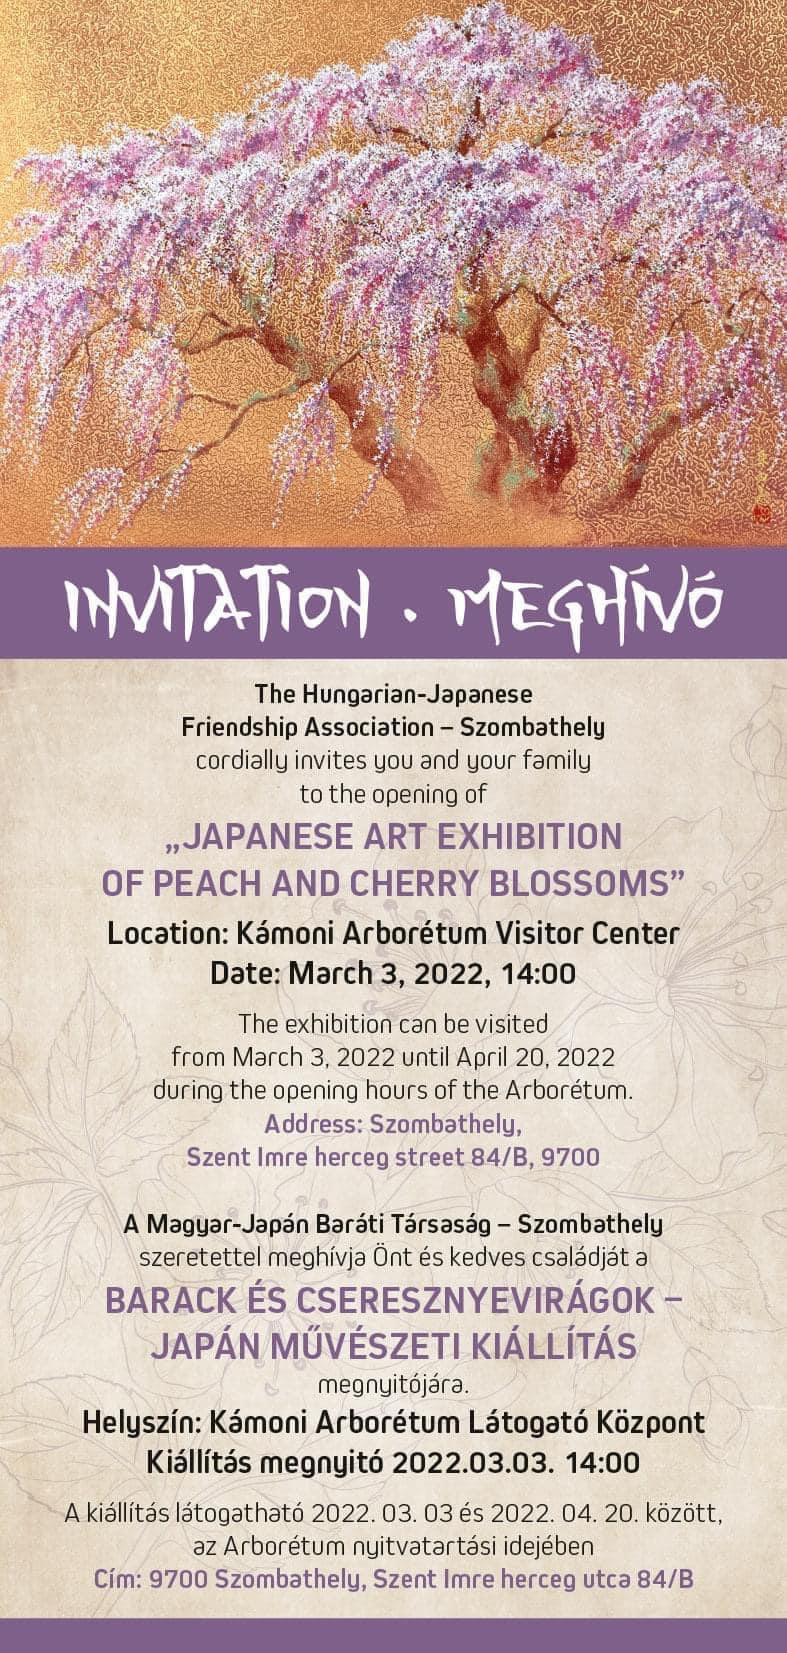 Japanese Art Exhibition of Peach and Cherry Blossoms